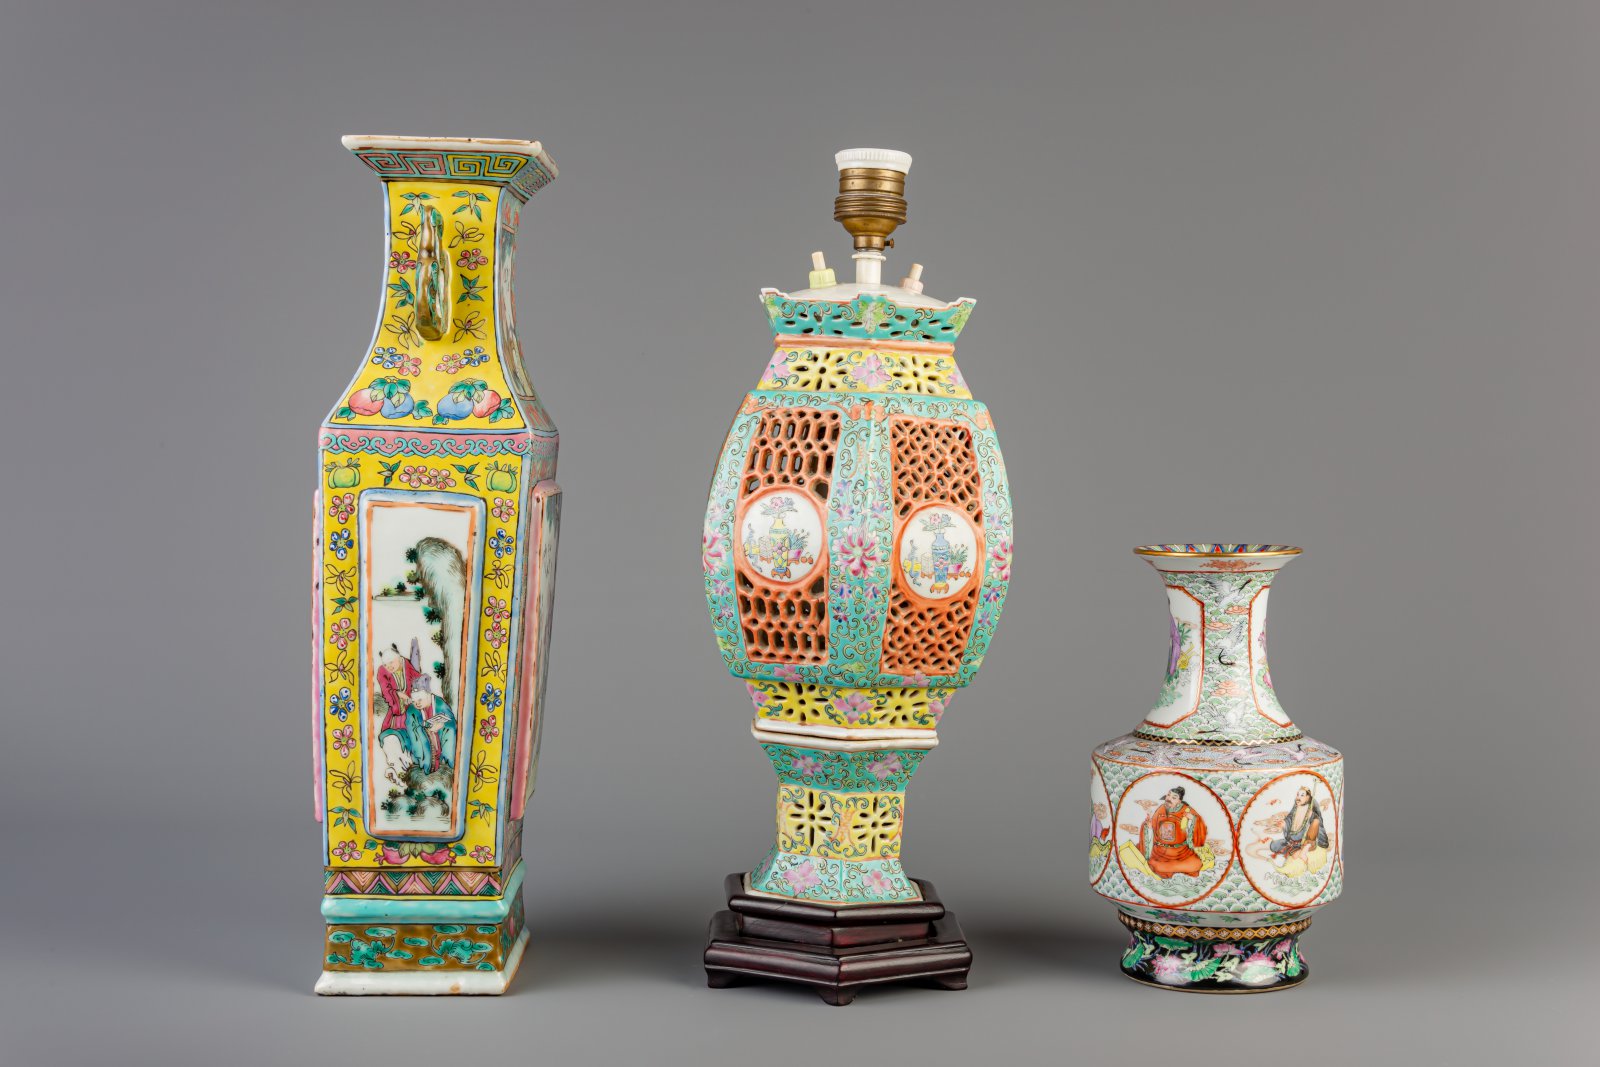 A Chinese famille rose lantern, an 'Immortals' vase and a vase with sages, 19th and 20th C. - Image 5 of 7